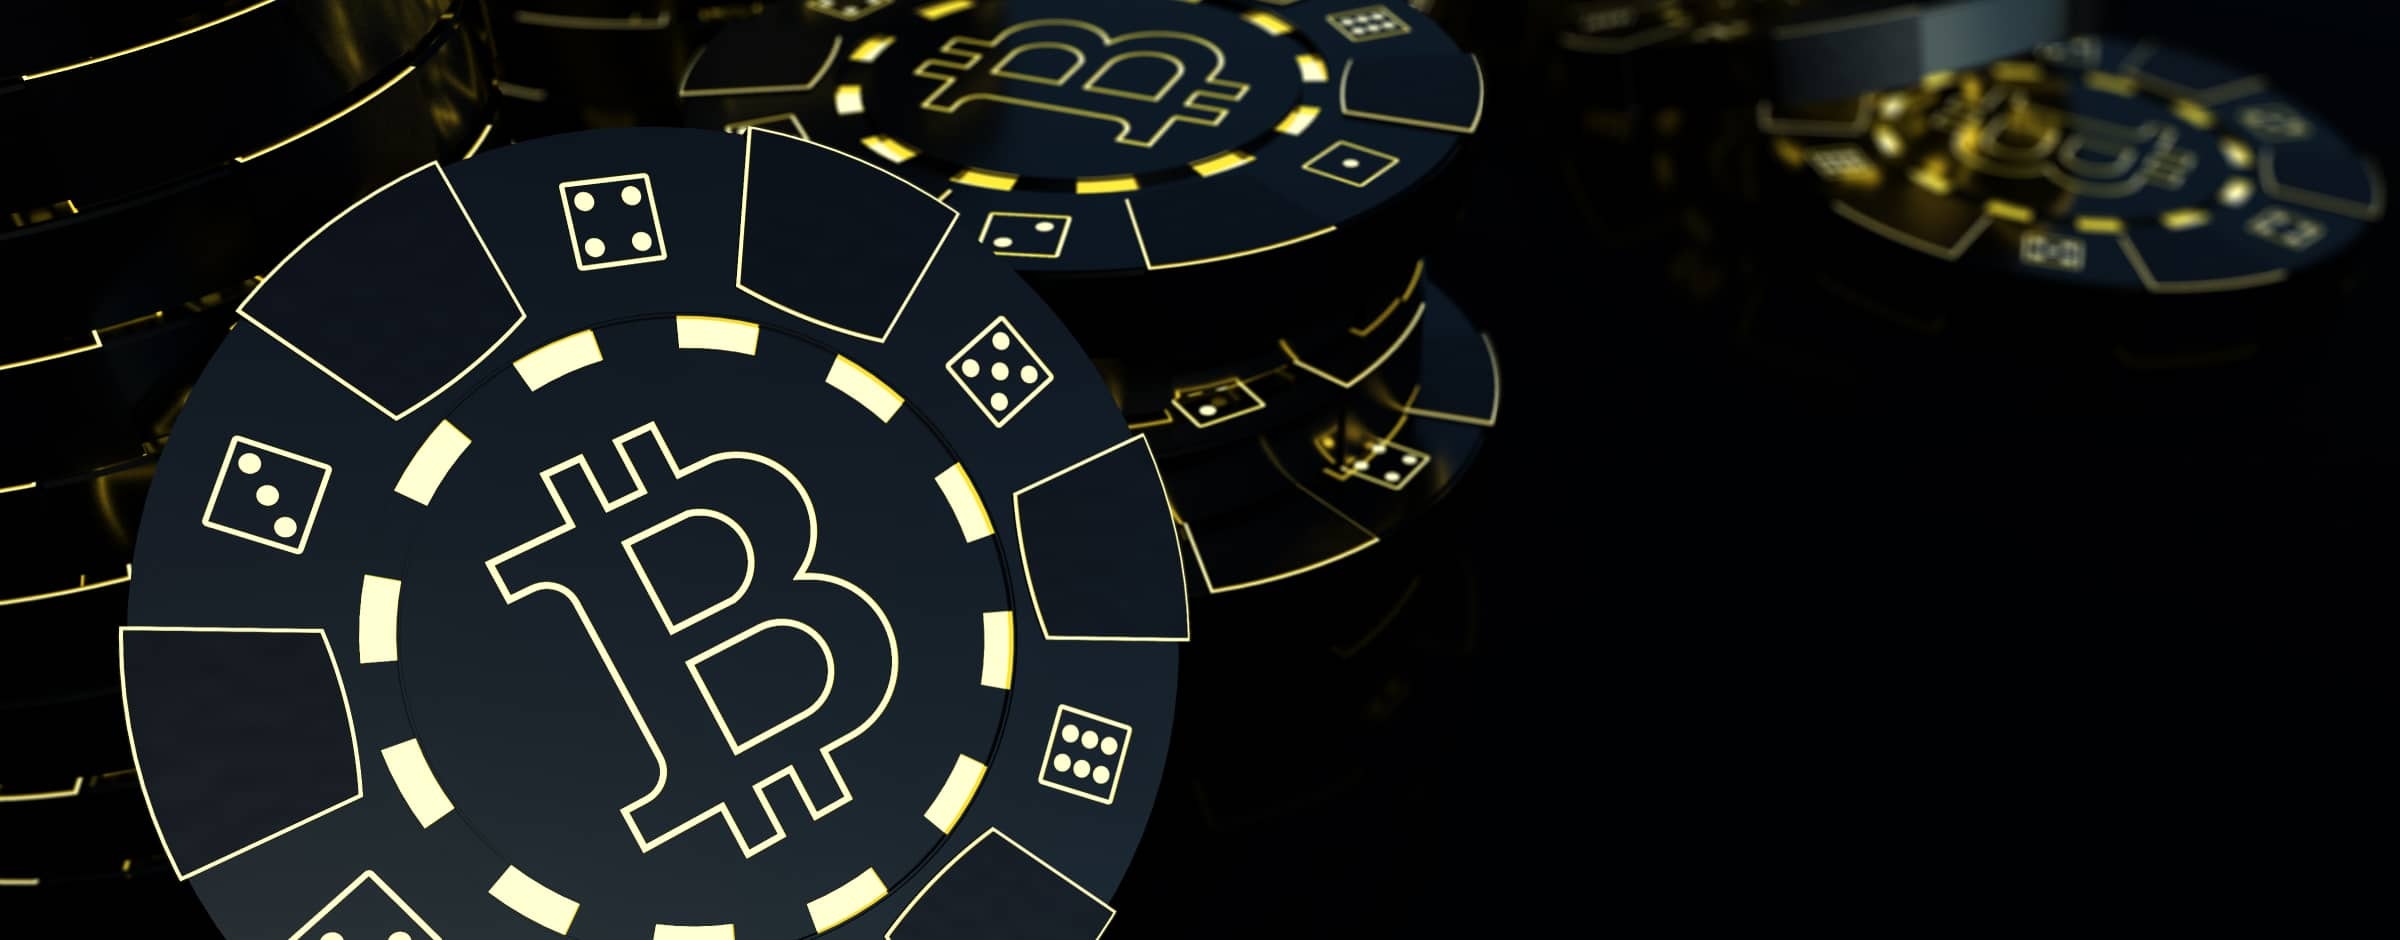 The Pro punter’s guide to gambling with Bitcoin